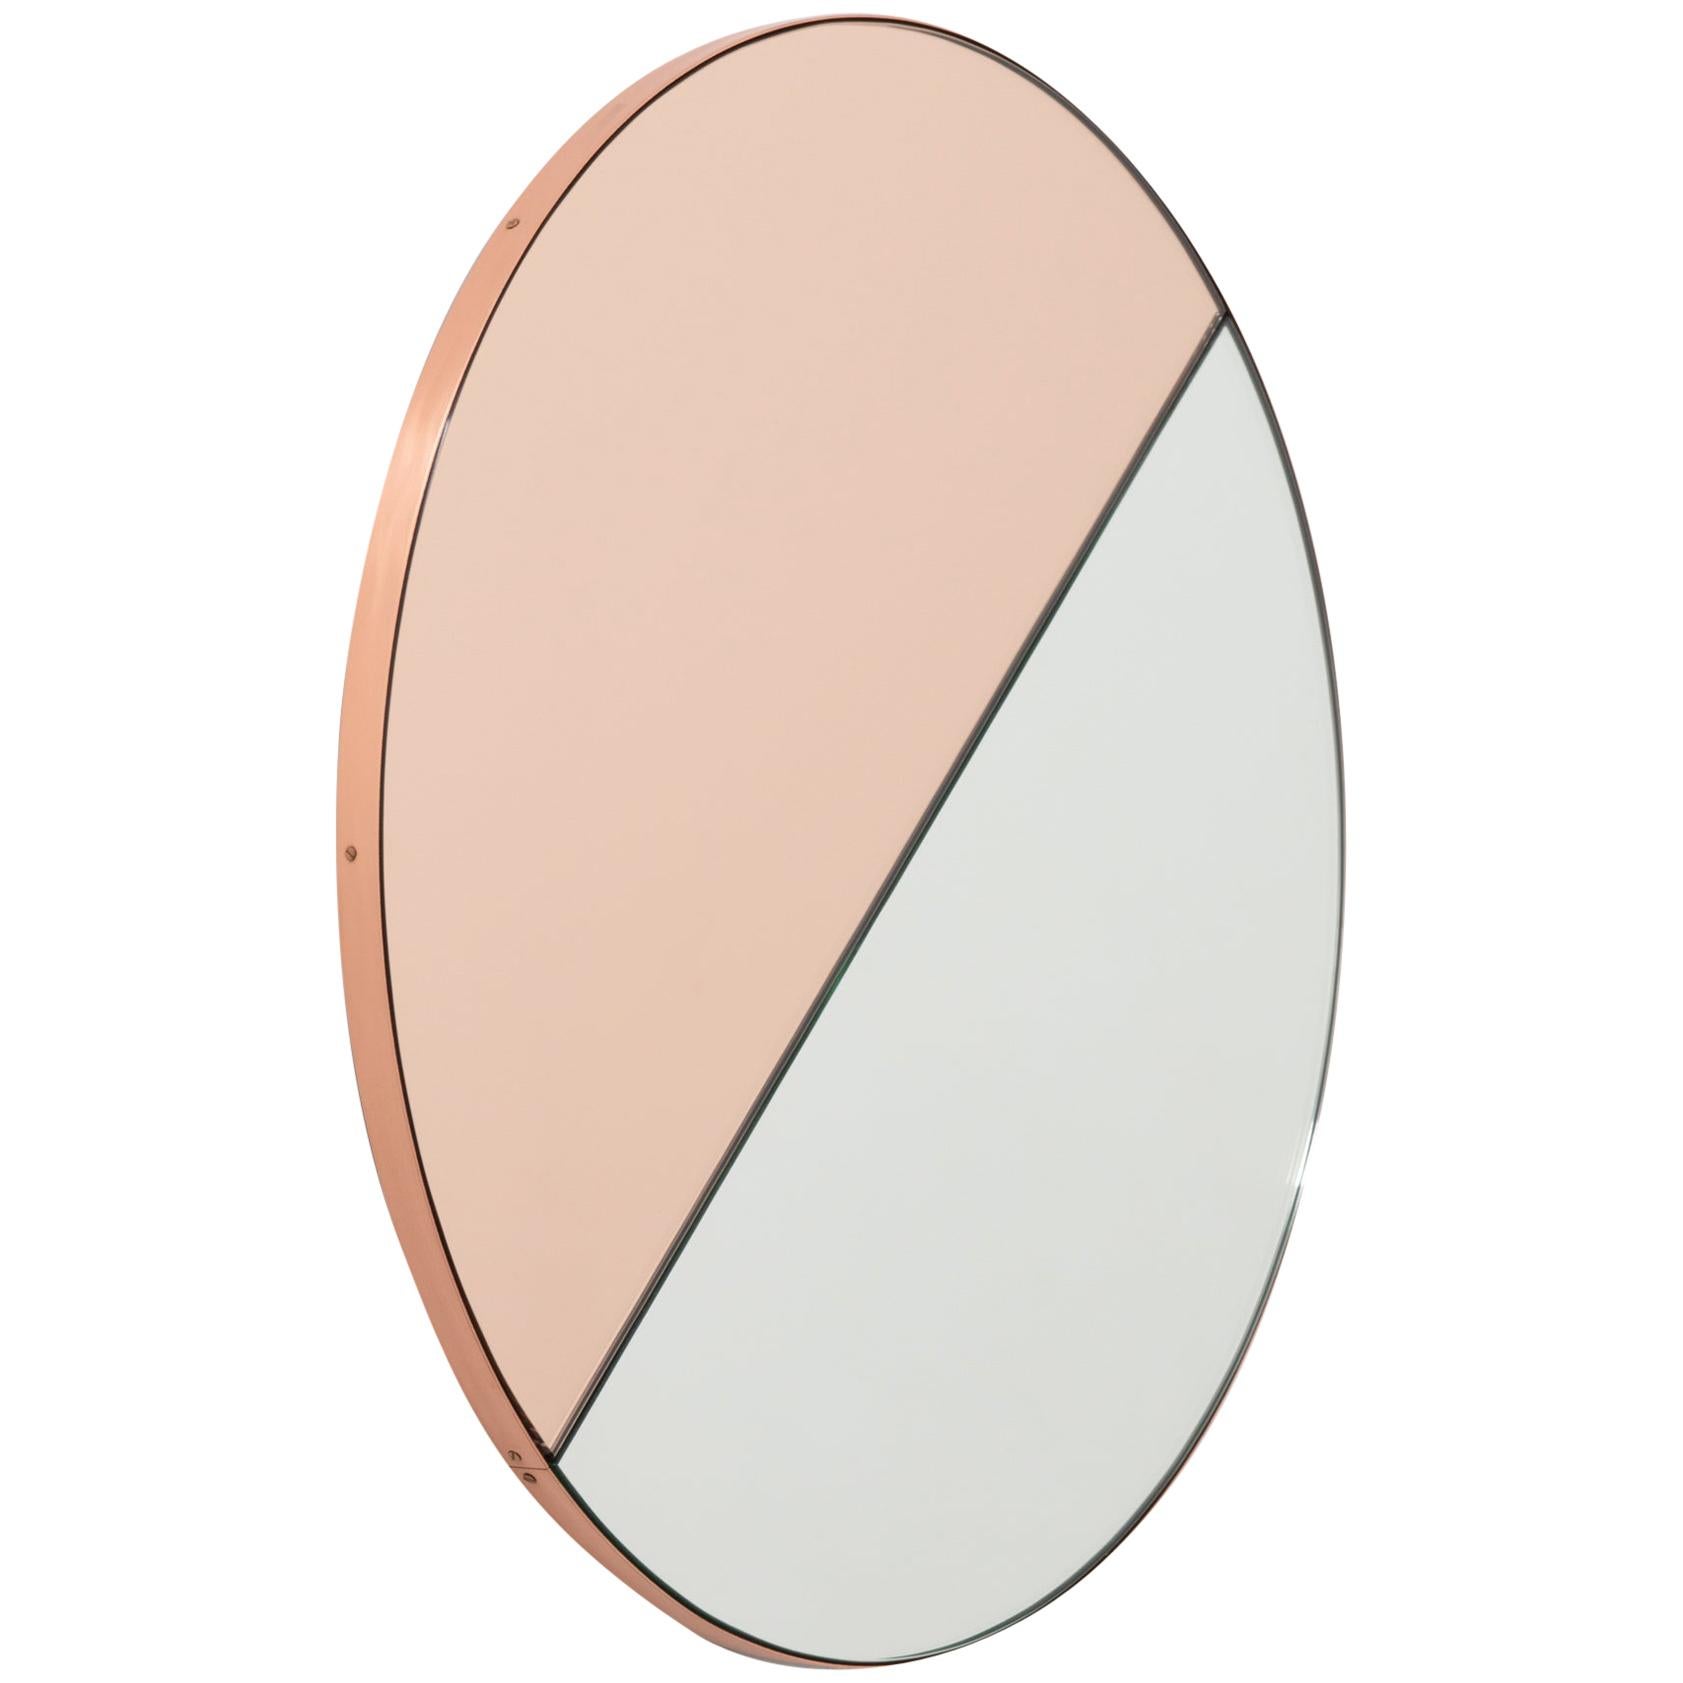 Orbis Dualis Mixed Rose Gold and Silver Round Mirror with Copper Frame, Medium